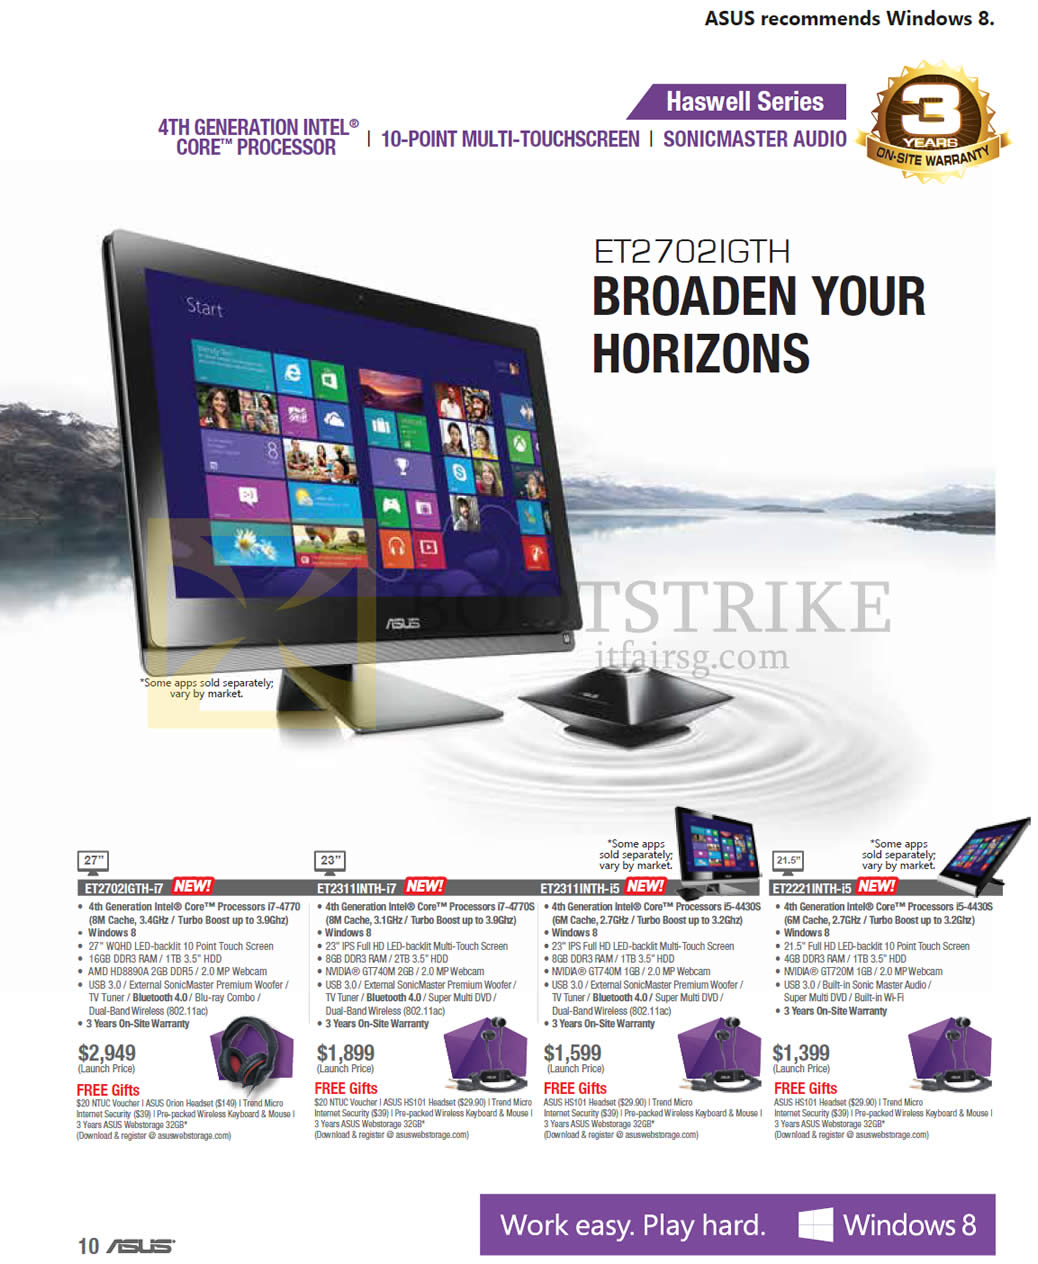 COMEX 2013 price list image brochure of ASUS Desktop PCs AIO ET2702IGTH, ET2702IGTH-i7, ET2311INTH-i7, ET2311INTH-i5, ET2221INTH-i5